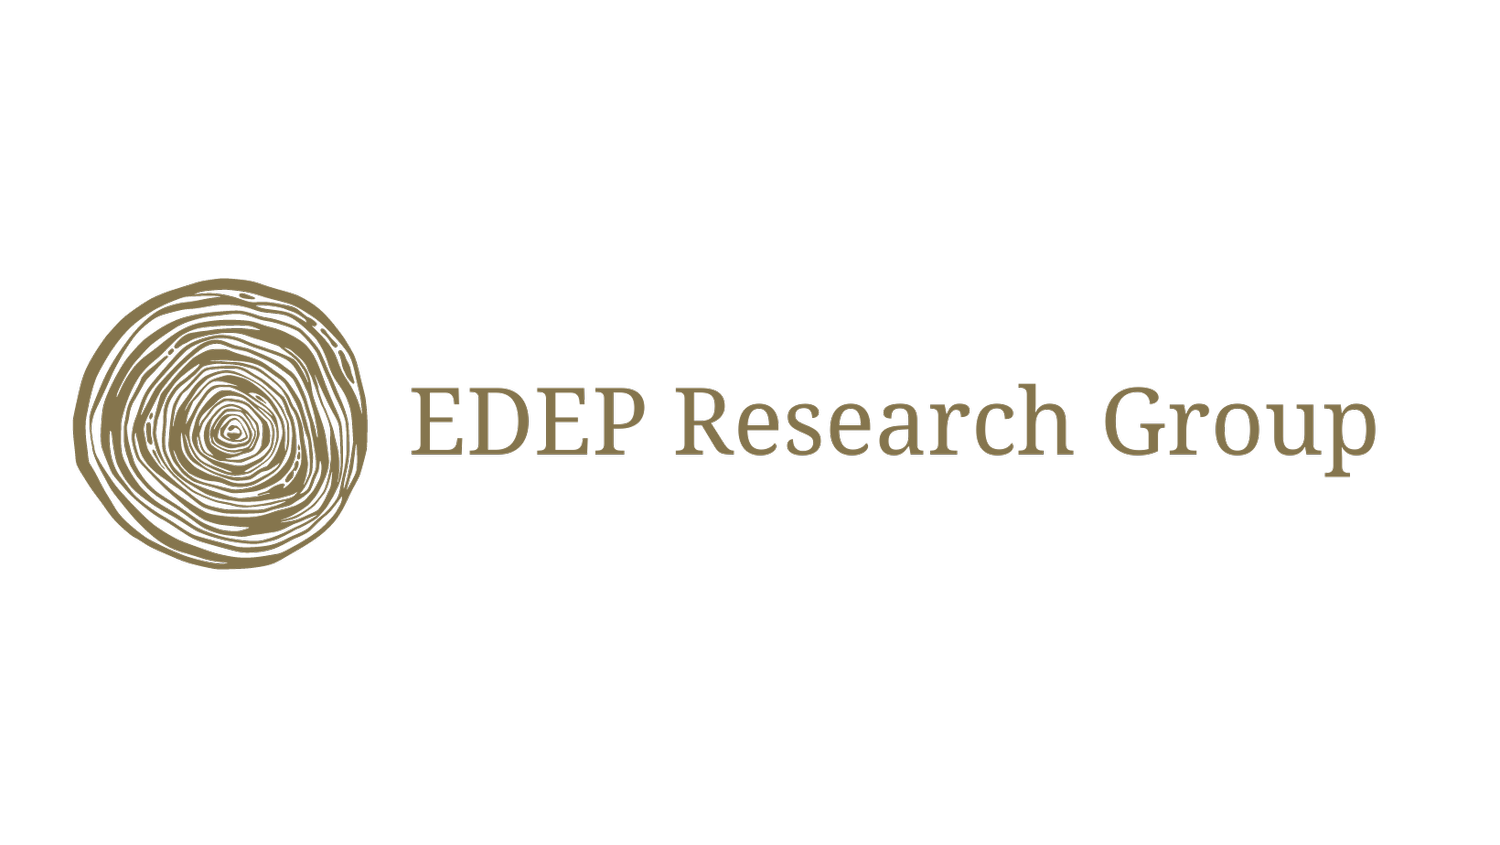 EDEP Research Group